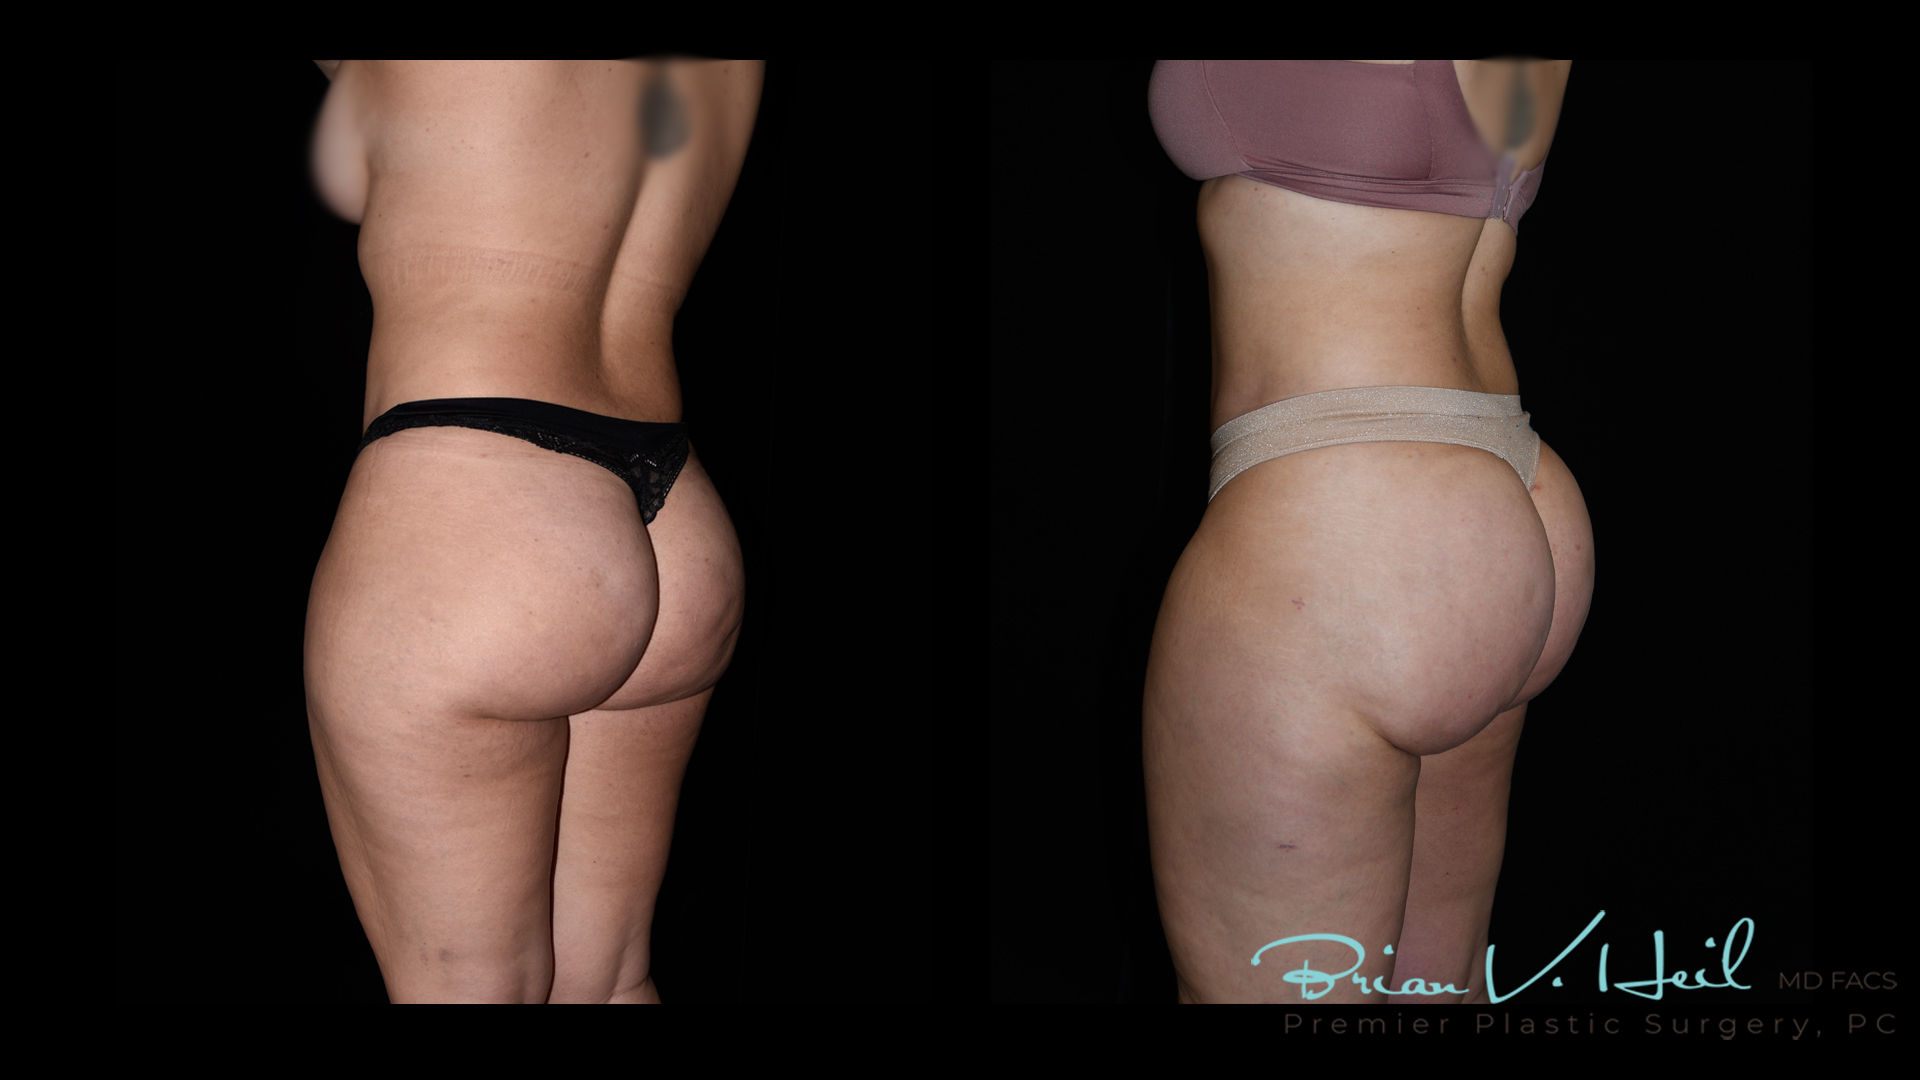 Brazilian Butt Lift Before and After | Premier Plastic Surgery